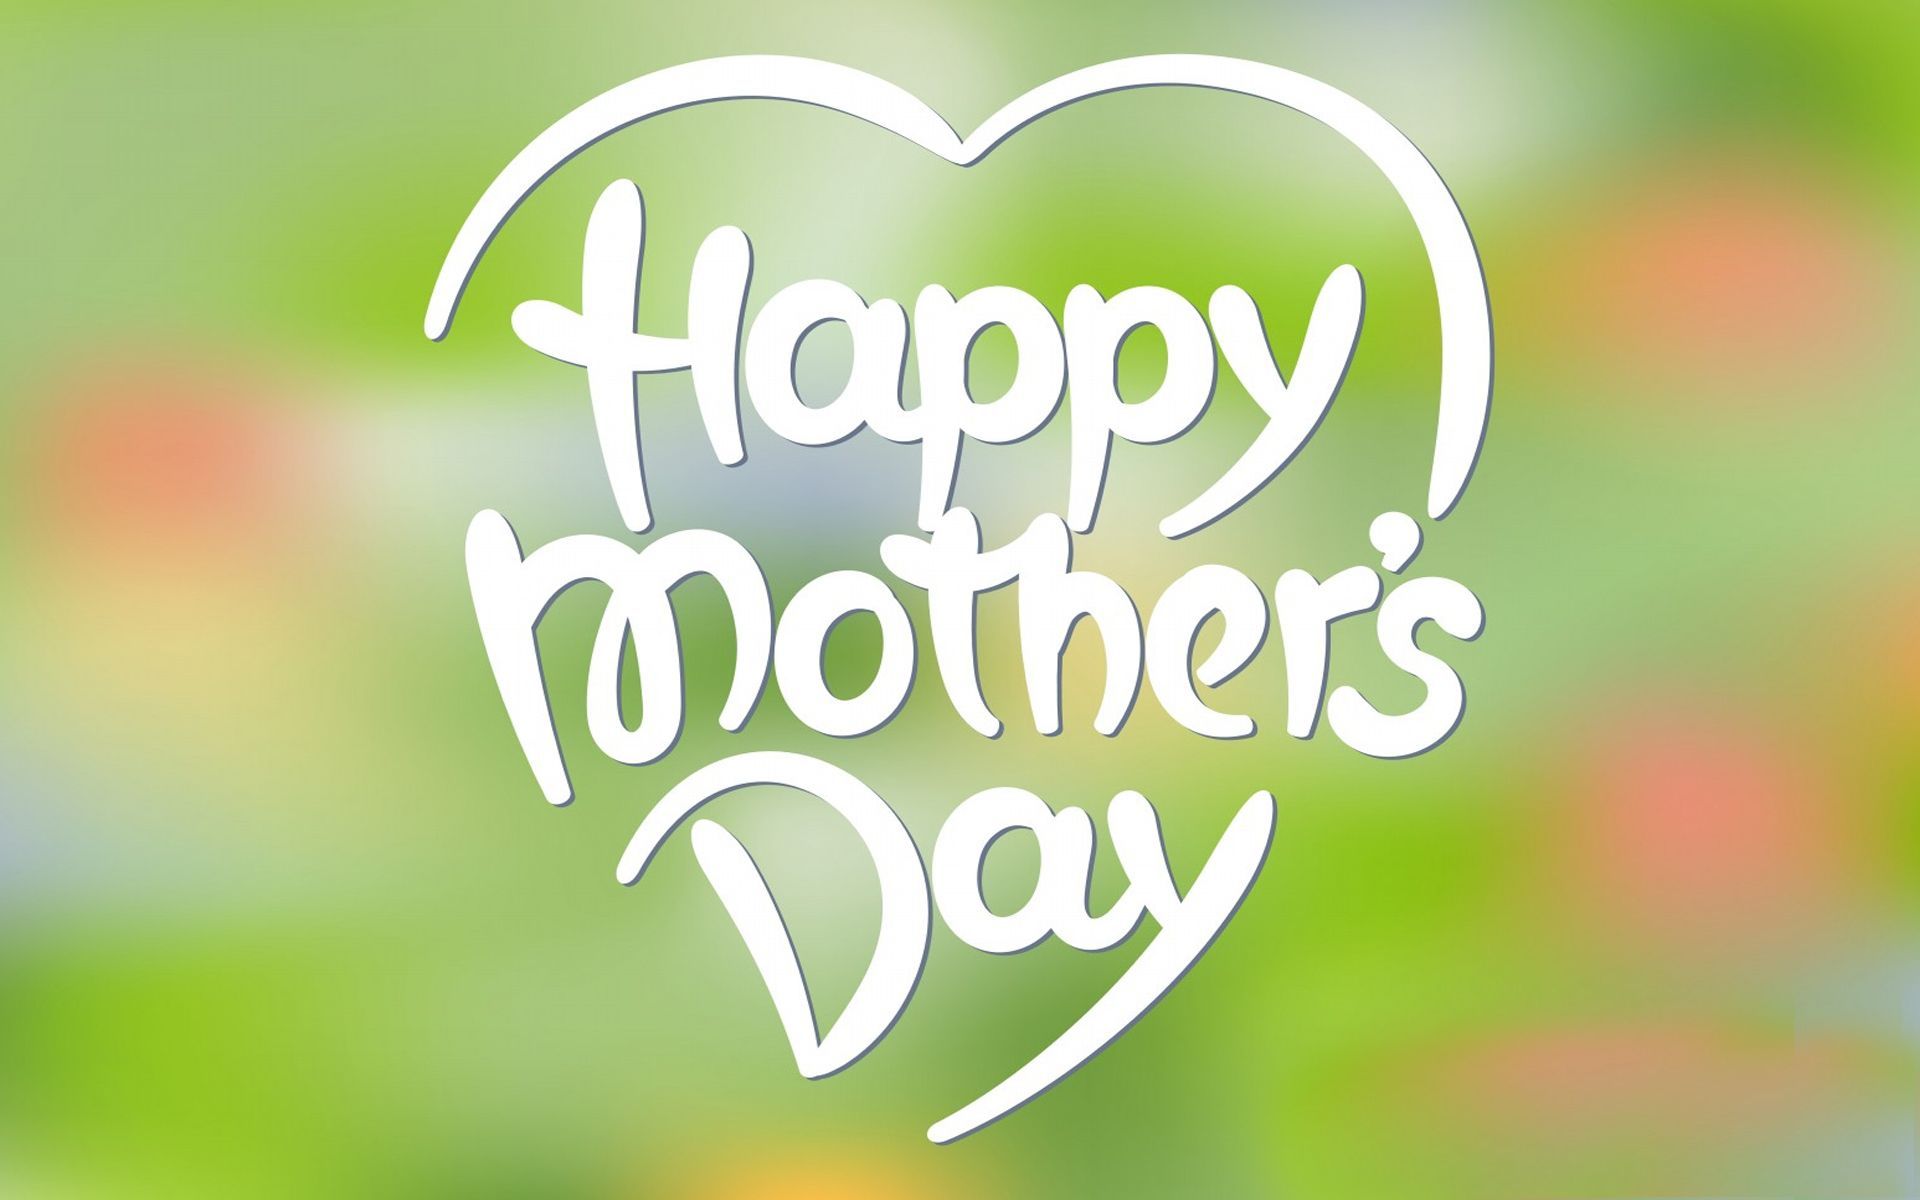 Happy Mother's Day 2018 Image, Photo, Pics, Wallpaper, HD Photo & Animated 3D GIFs for Free Download